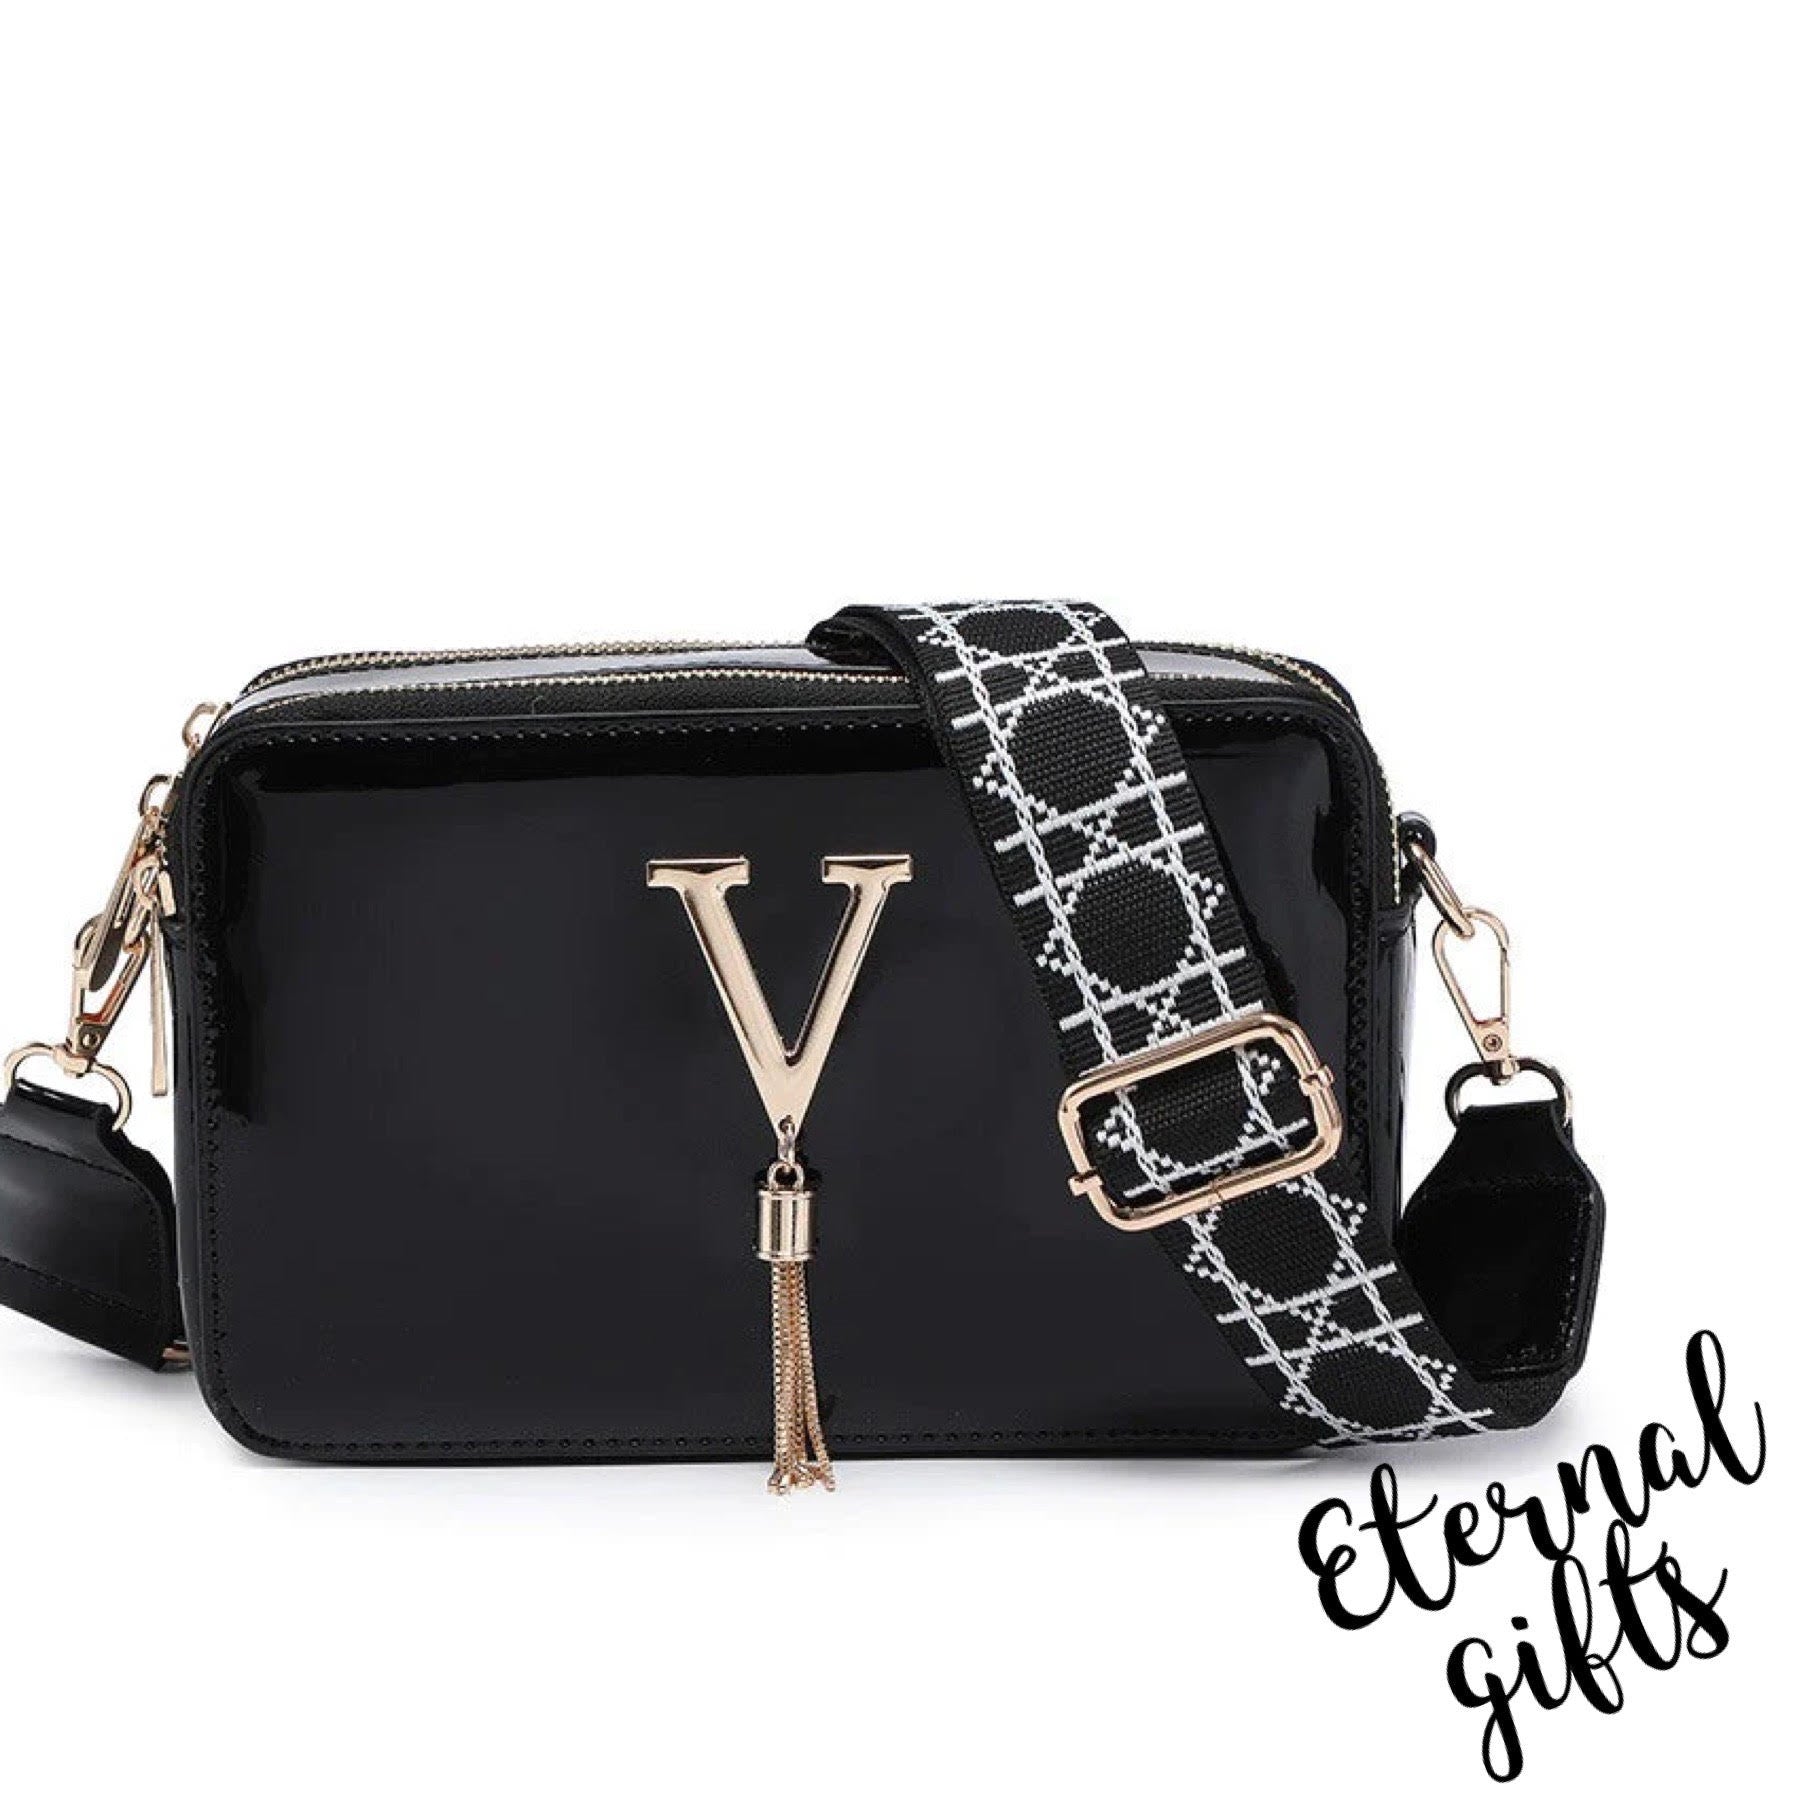 Ms Valentine Patent in Black with A wide Adjustable Strap